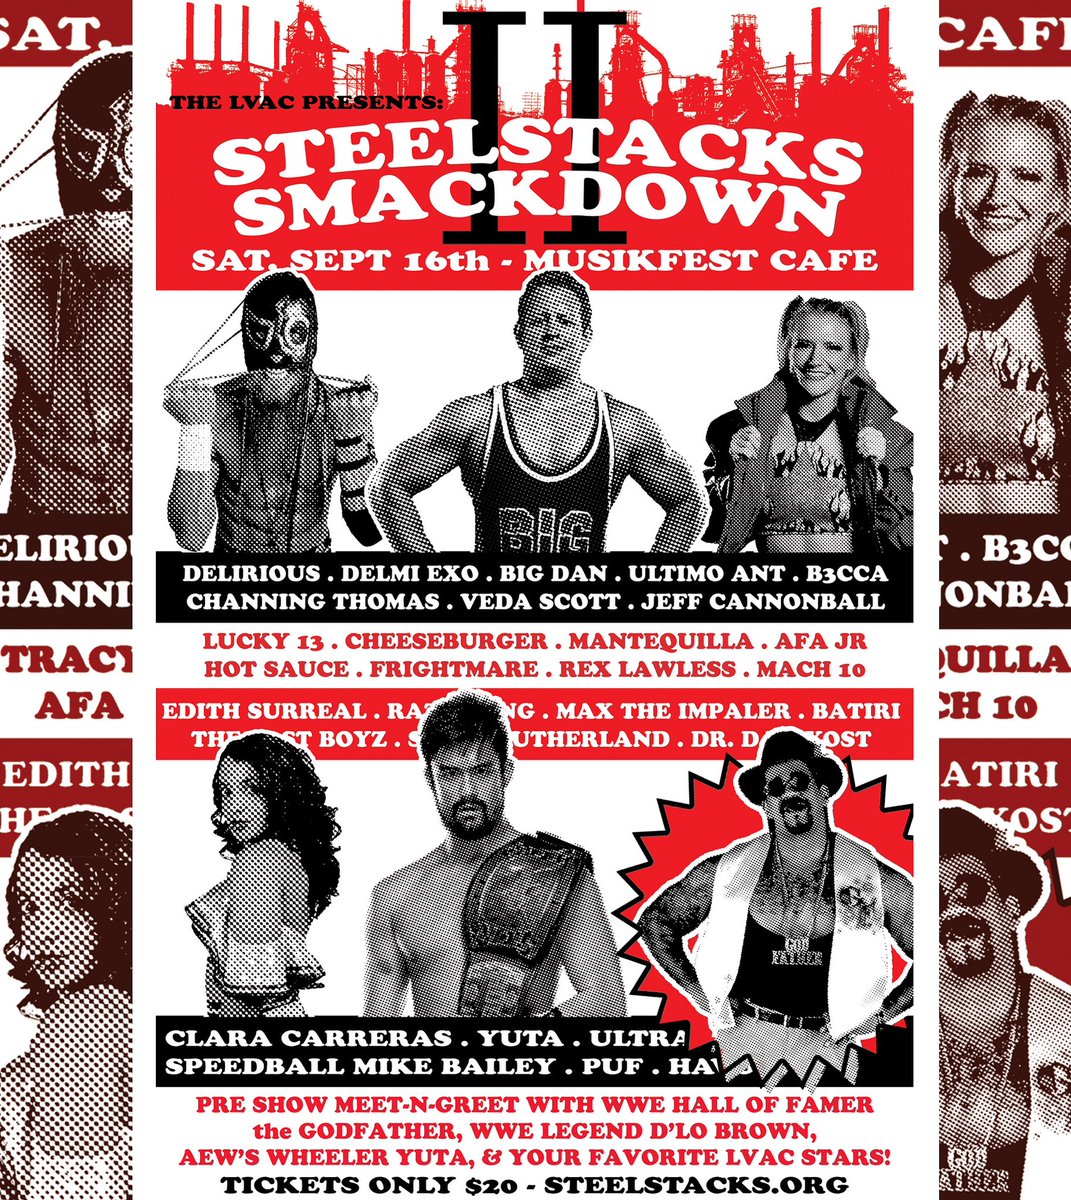 Only a few more weeks until the Lehigh Valley’s biggest independent wrestling event returns to @steelstacks_pa! Get your tickets now for STEELSTACKS SMACKDOWN II on Sept 16th! Only $20 at STEELSTACKS.ORG!